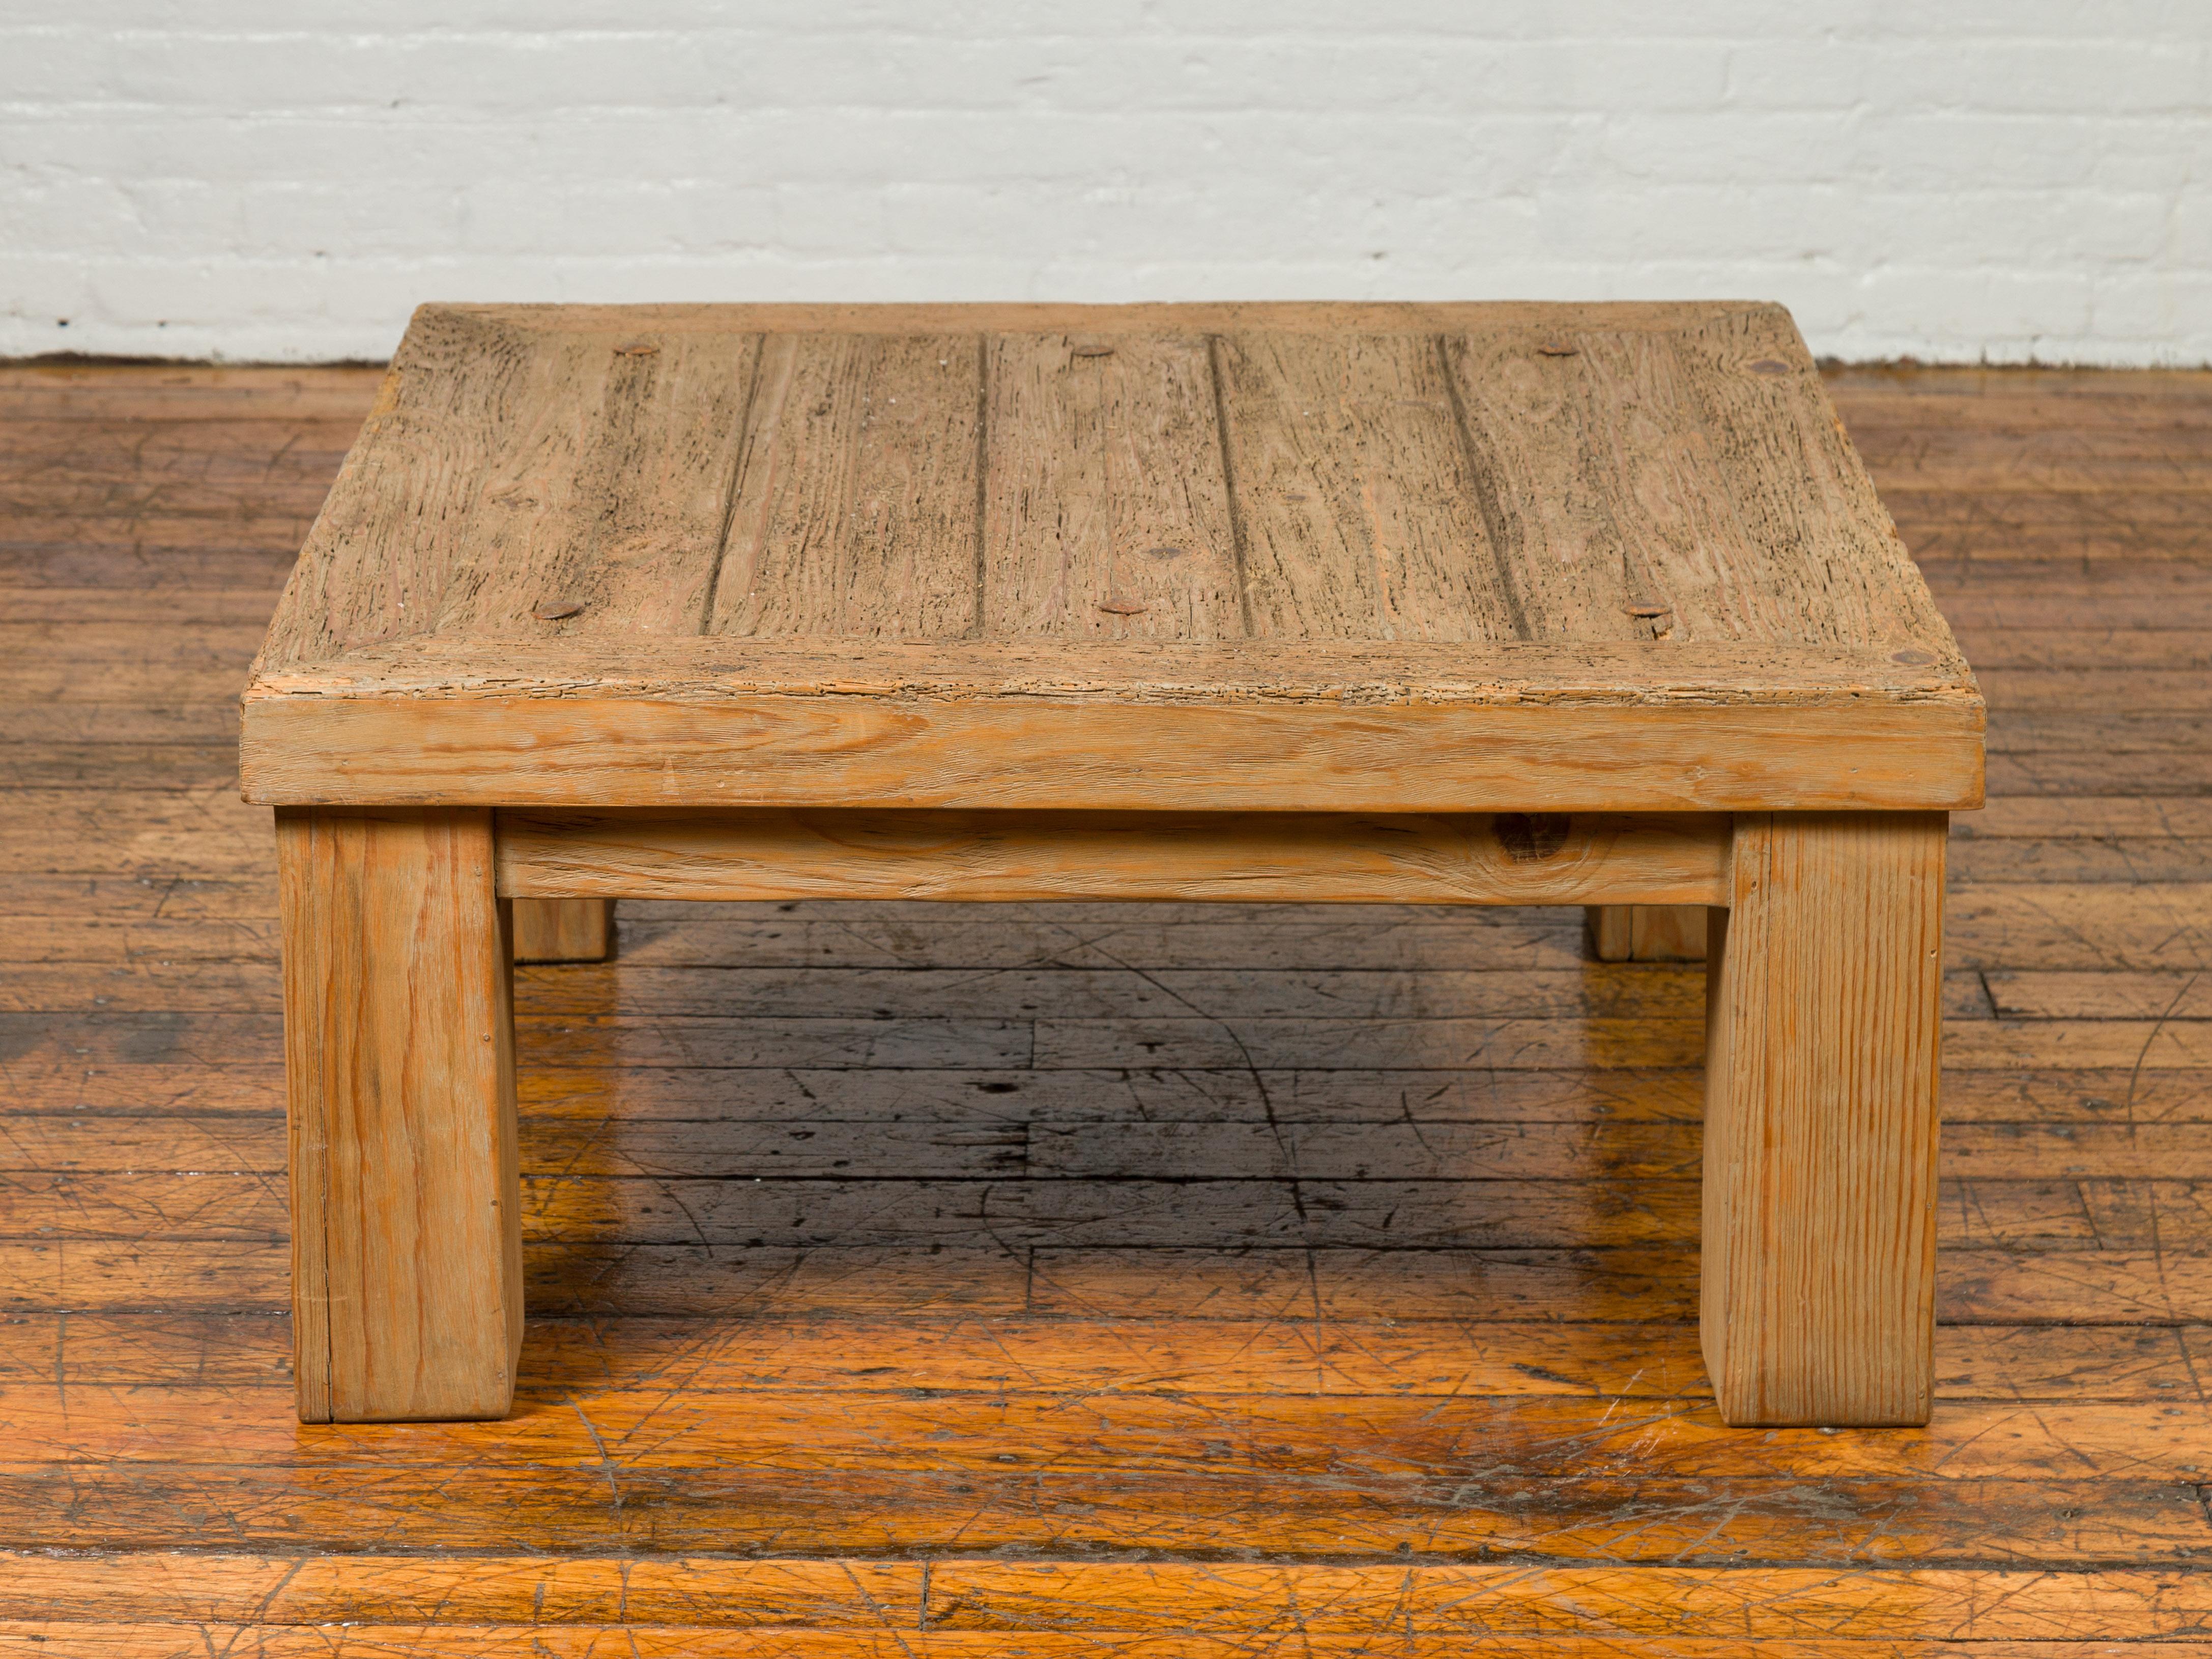 Vintage Driftwood Midcentury Coffee Table from Mexico with Square Legs 6